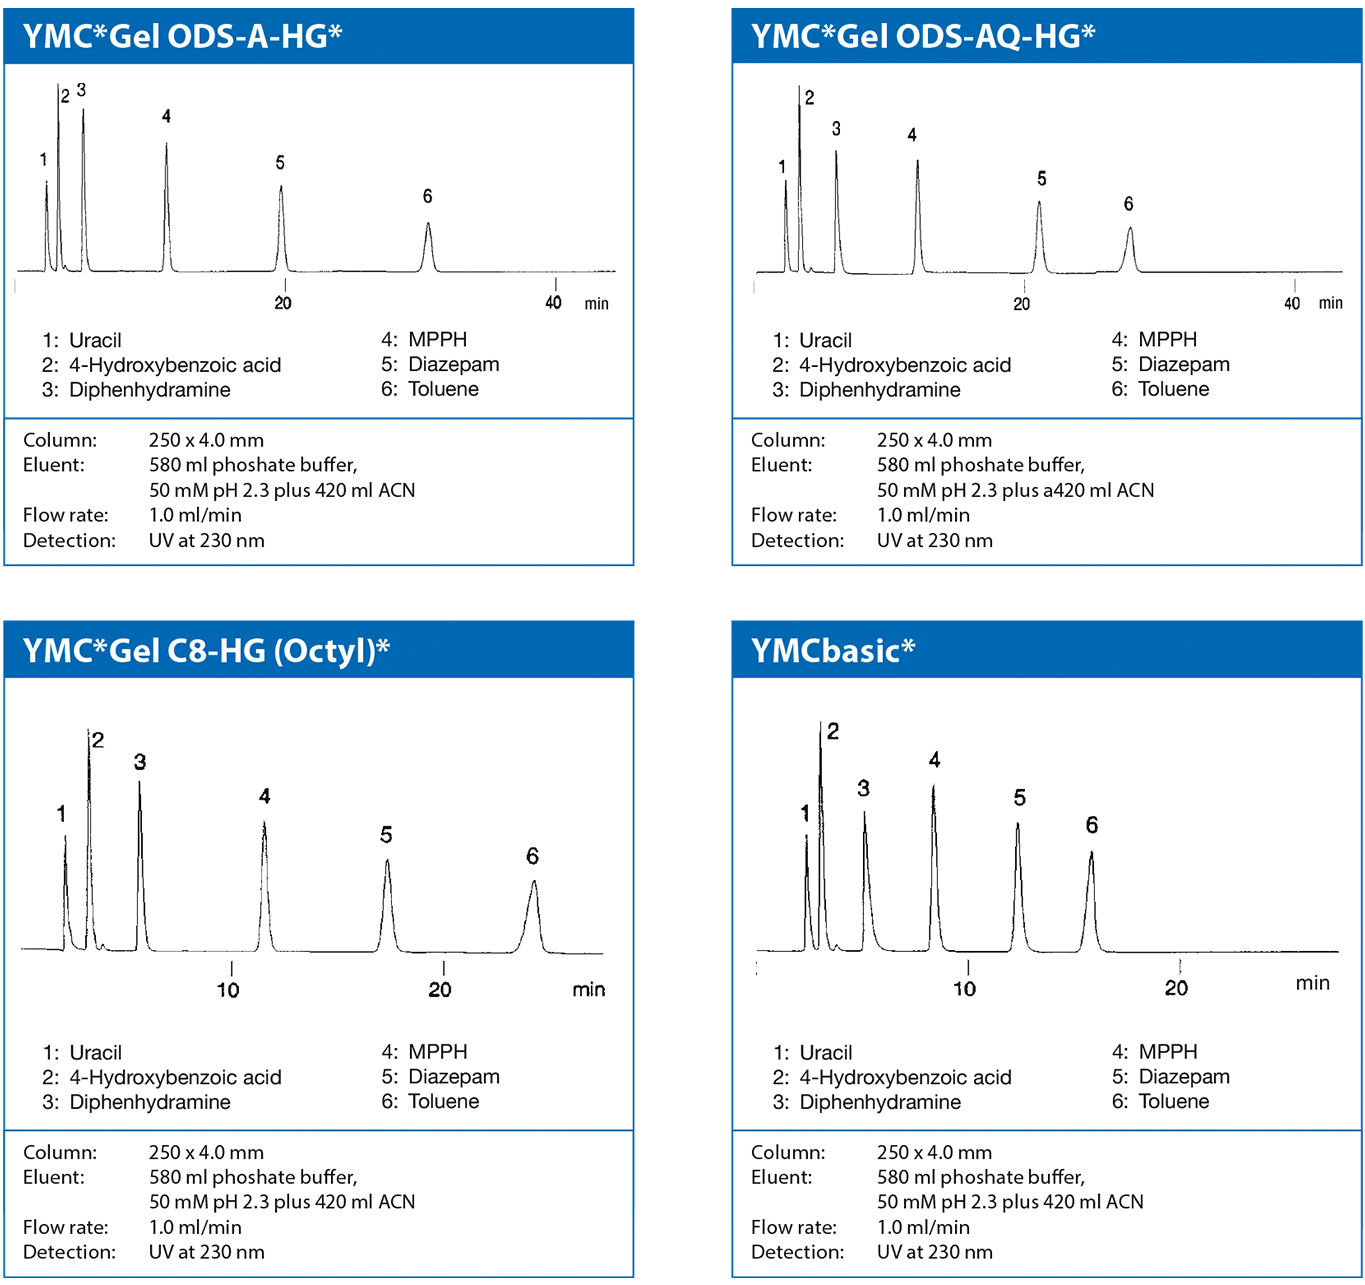 The image illustrates the versatile selectivity with YMC*Gel HG. Four HPLC chromatograms show the separation profiles with four different C18- and C8-modified RP stationary phase materials for chromatographic column packing.